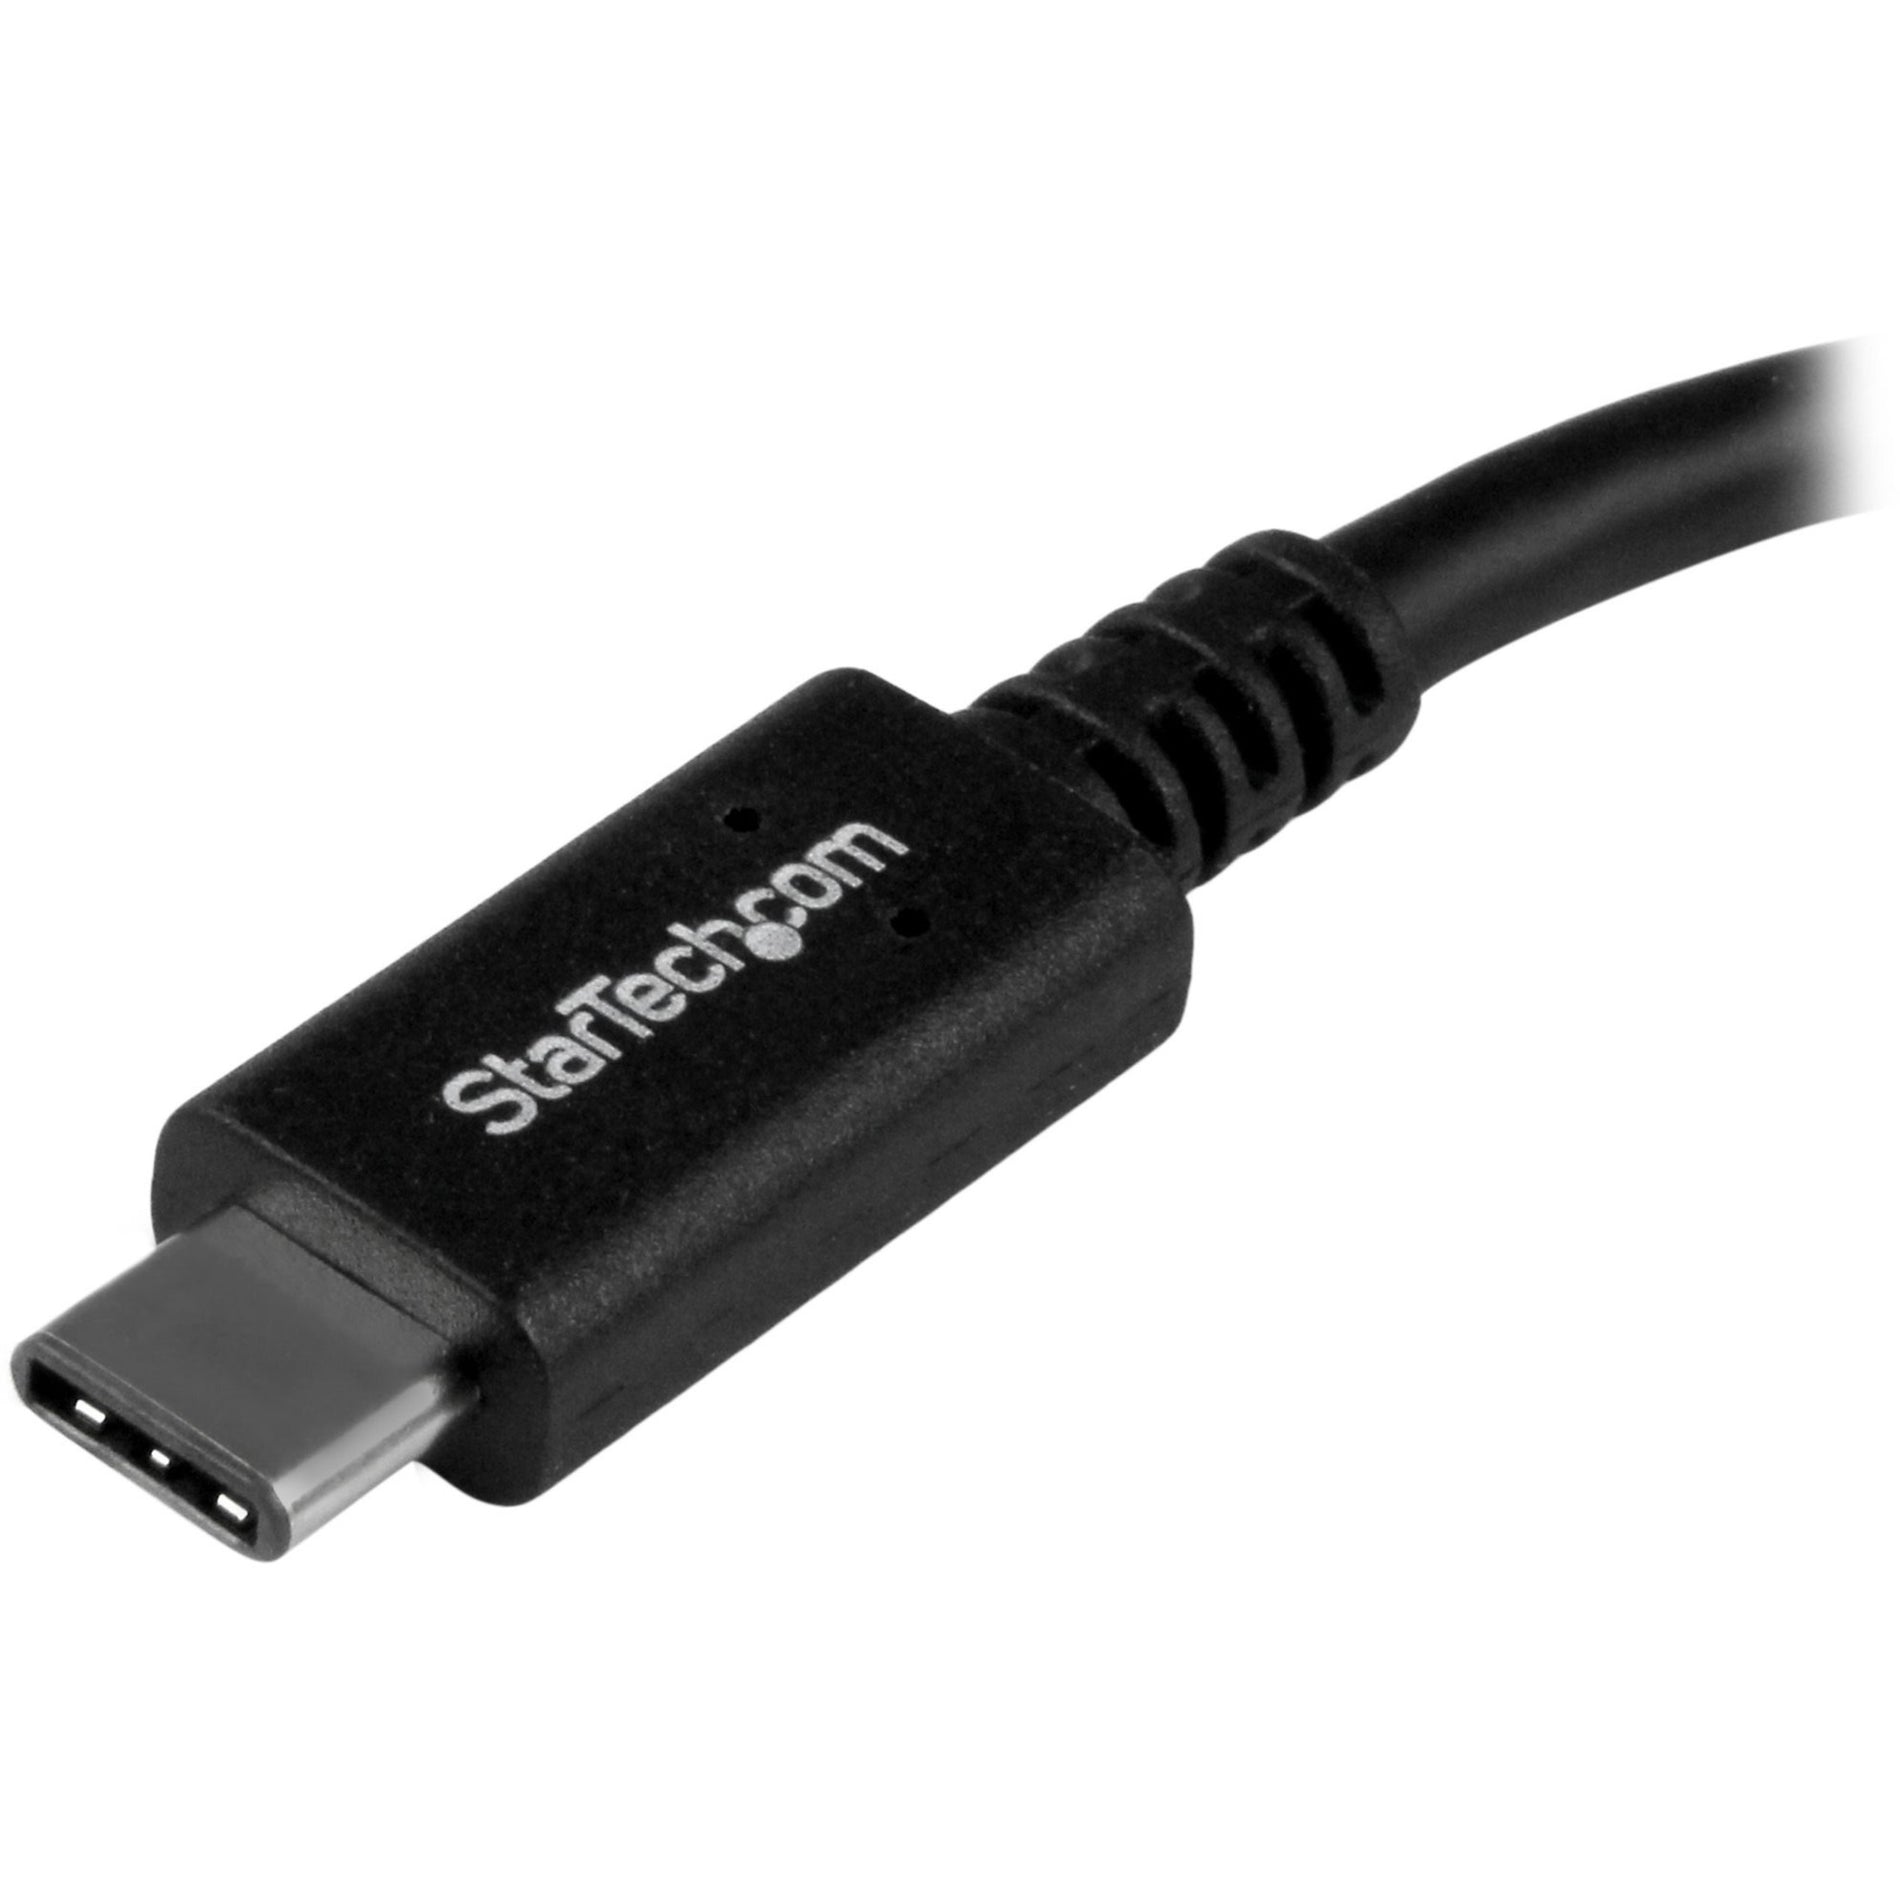 StarTech.com USB31CAADP USB-C to USB-A Adapter Cable - M/F - 6in, USB 3.0, USB-IF Certified